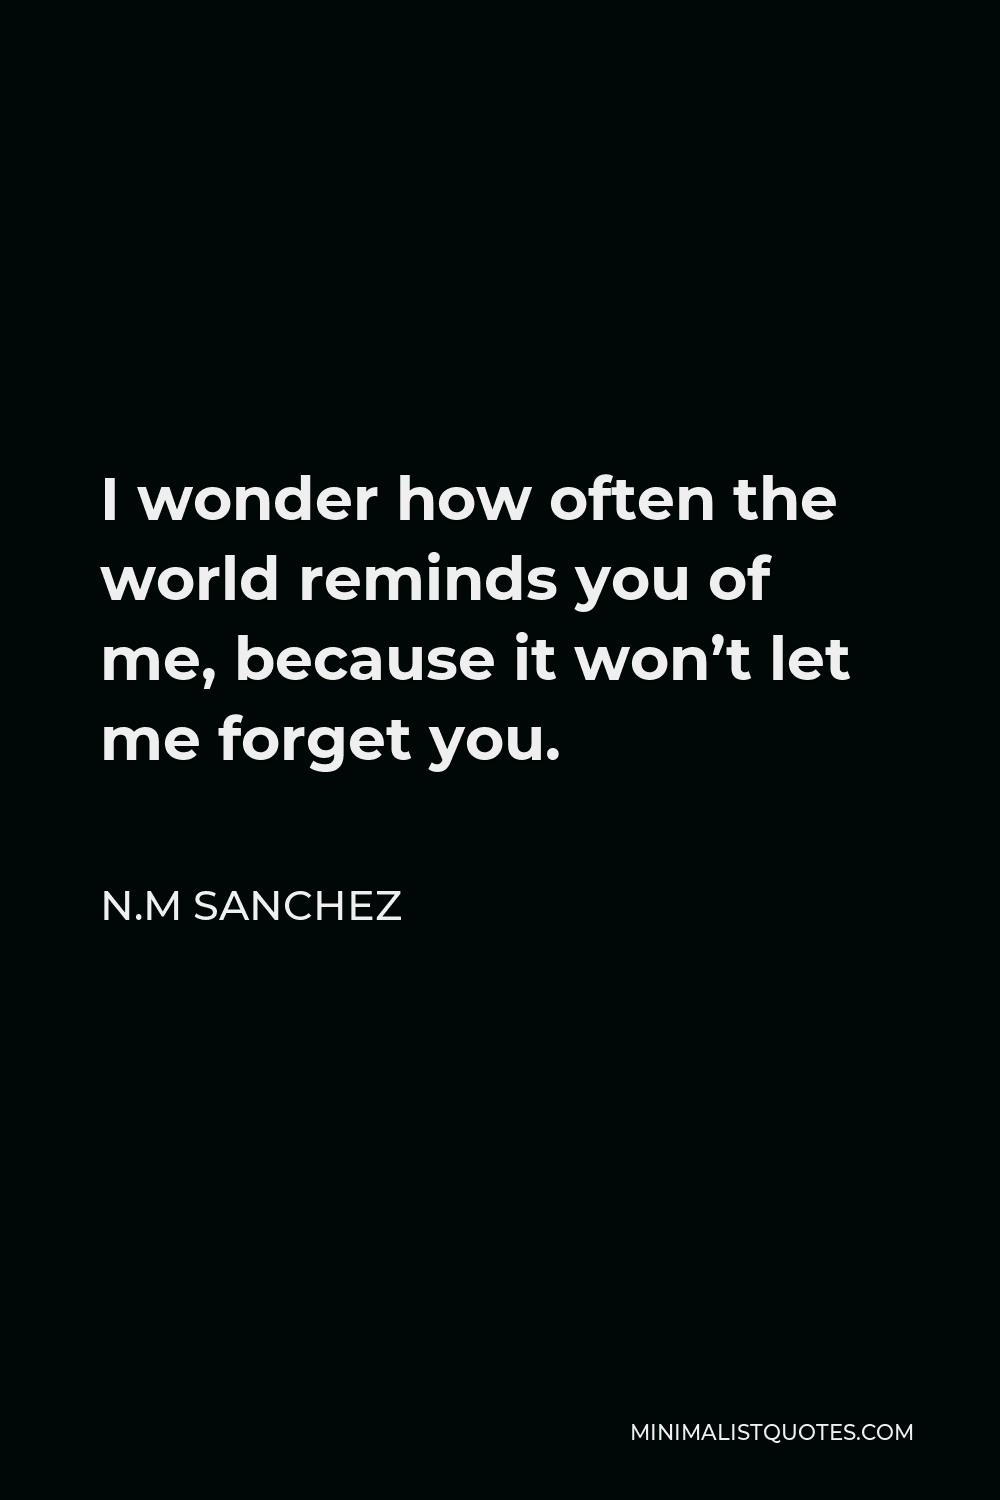 N.M Sanchez Quote - I wonder how often the world reminds you of me, because it won’t let me forget you.